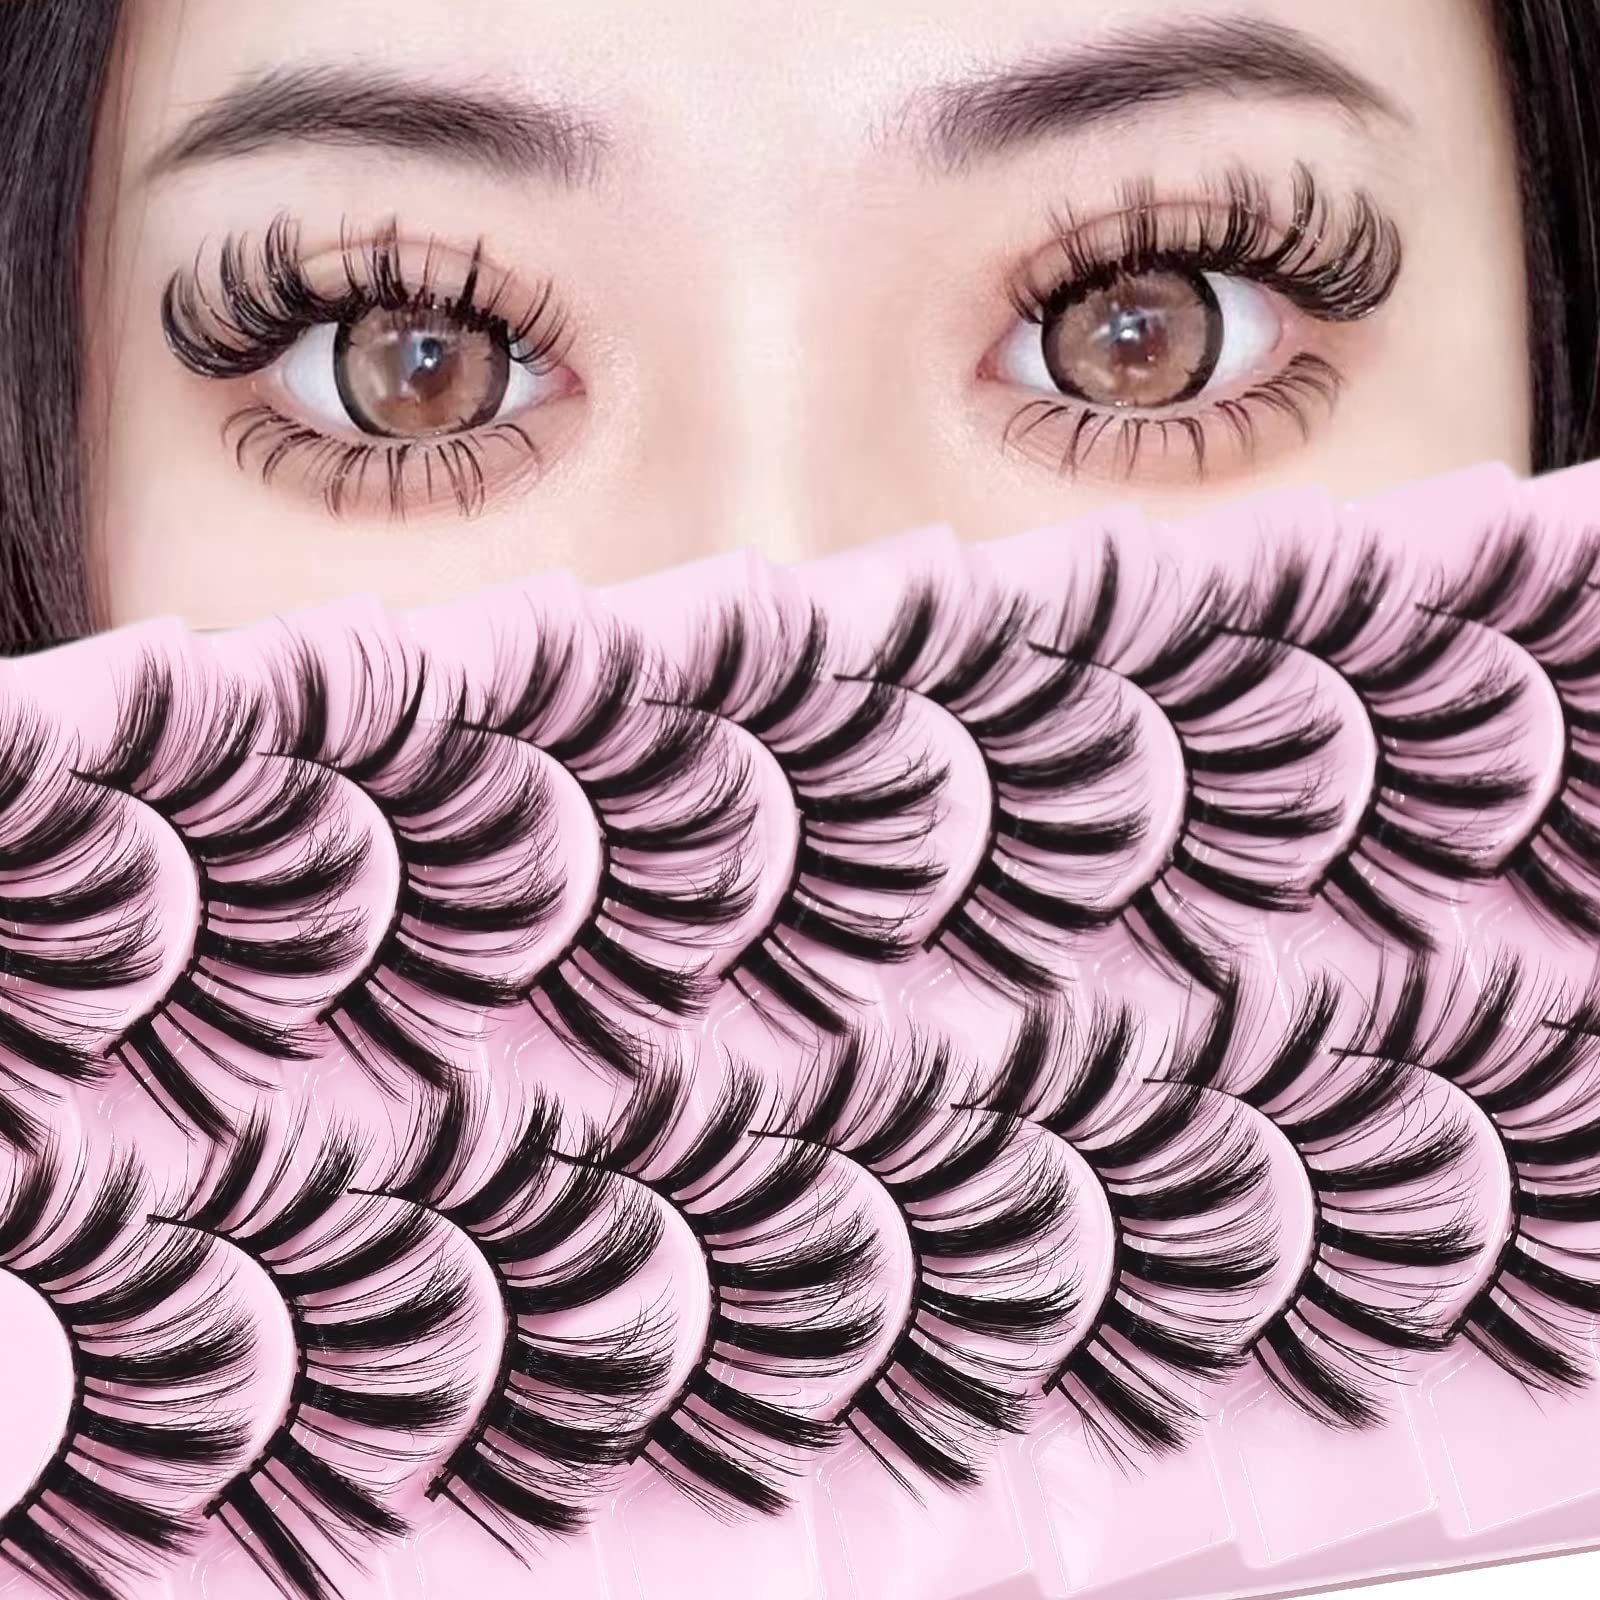 Manga Lashes Fluffy Faux Mink Lashes 14 Pairs Natural False Lashes Pack  Wispy Short Anime Lashes Look Like Individual Clusters| 3D1009 - Walmart.com